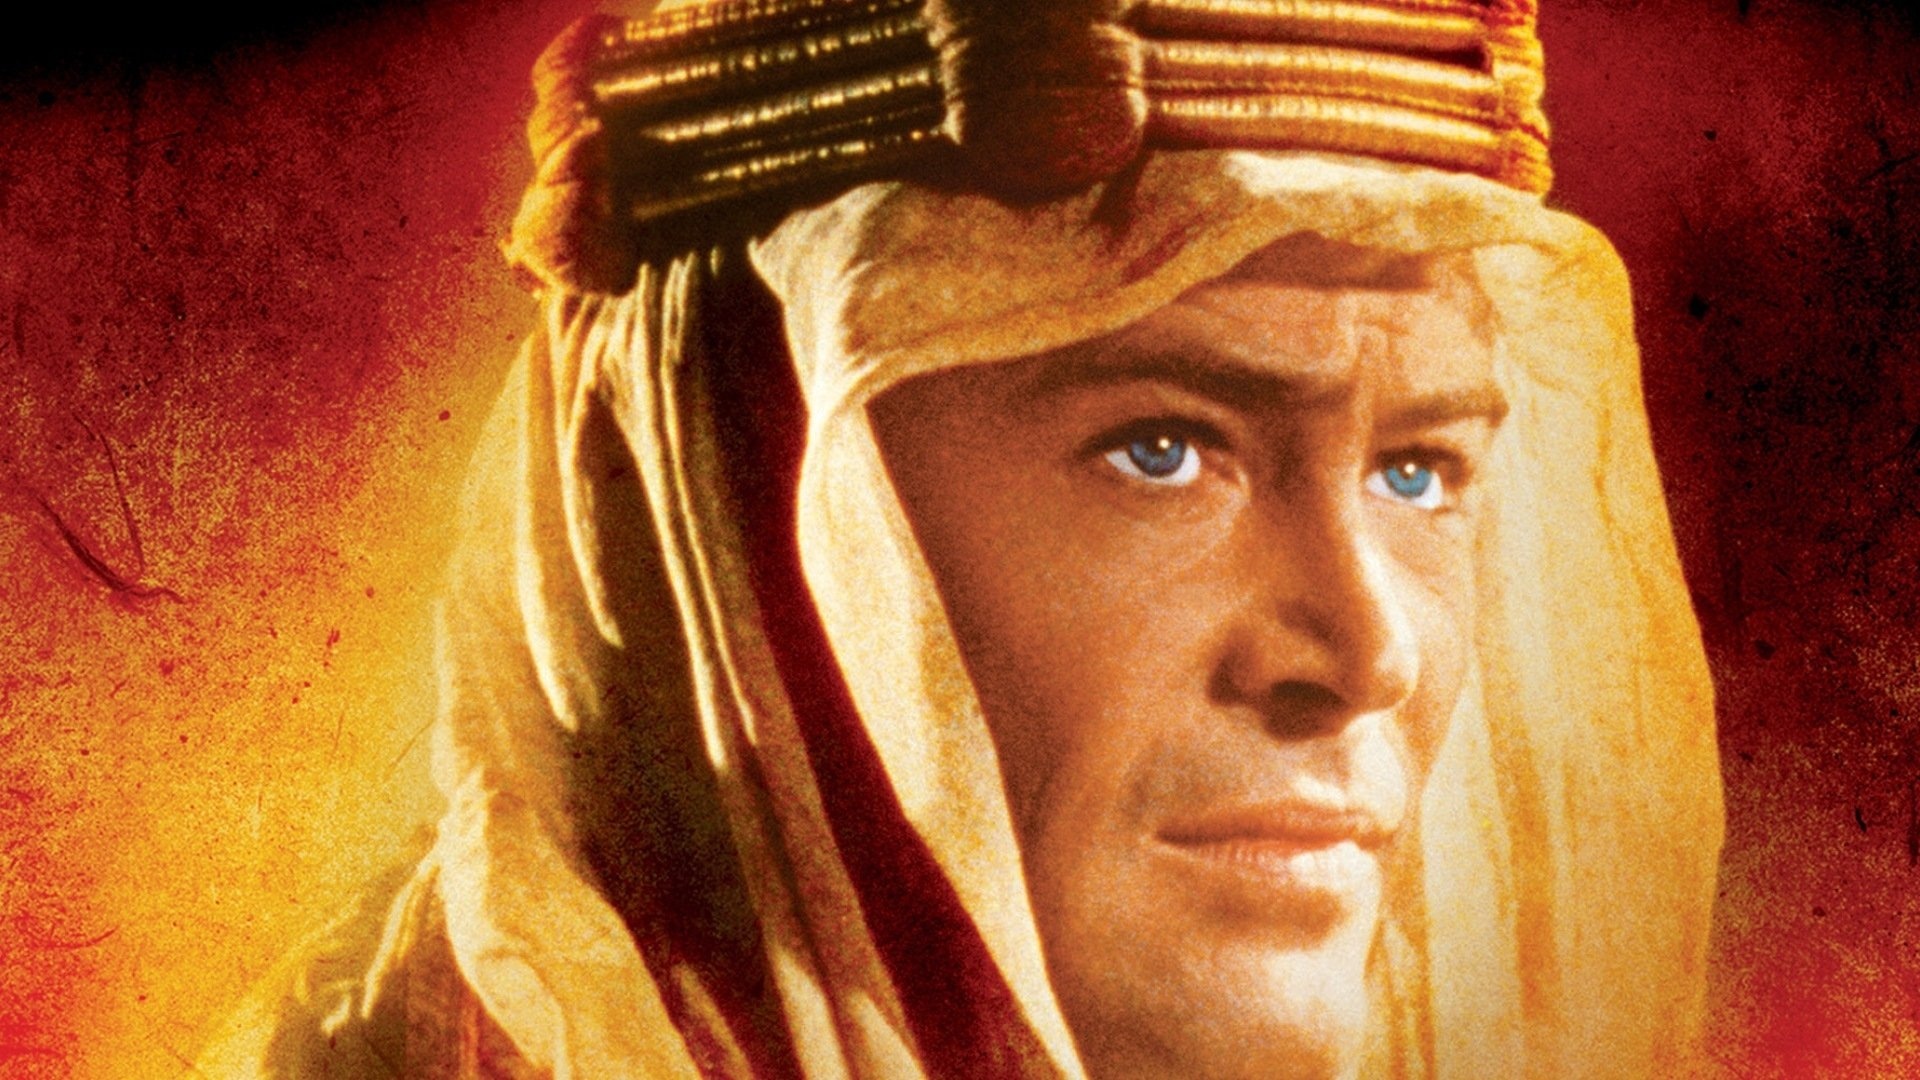 Lawrence of Arabia: Peter O'Toole, achieved international recognition playing T. E. Lawrence. 1920x1080 Full HD Wallpaper.